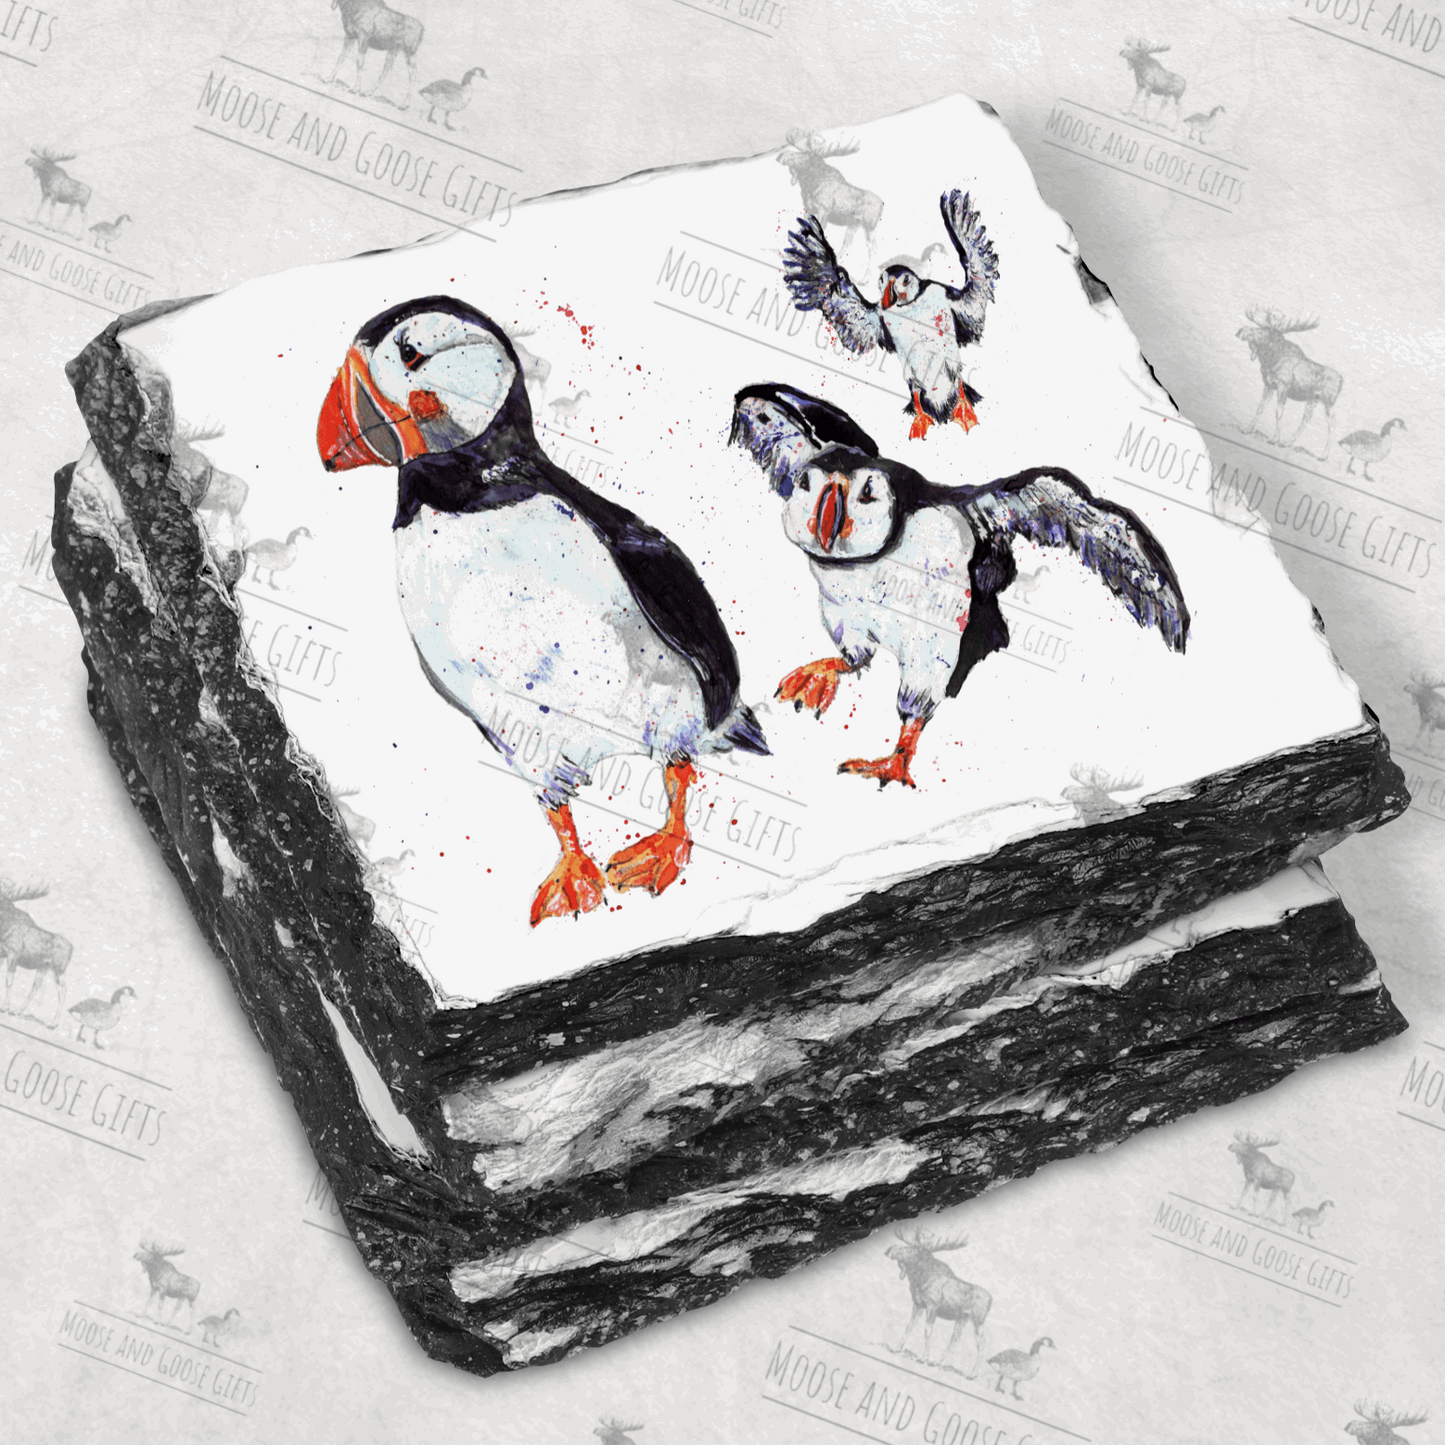 Puffin slate coaster - Moose and Goose Gifts